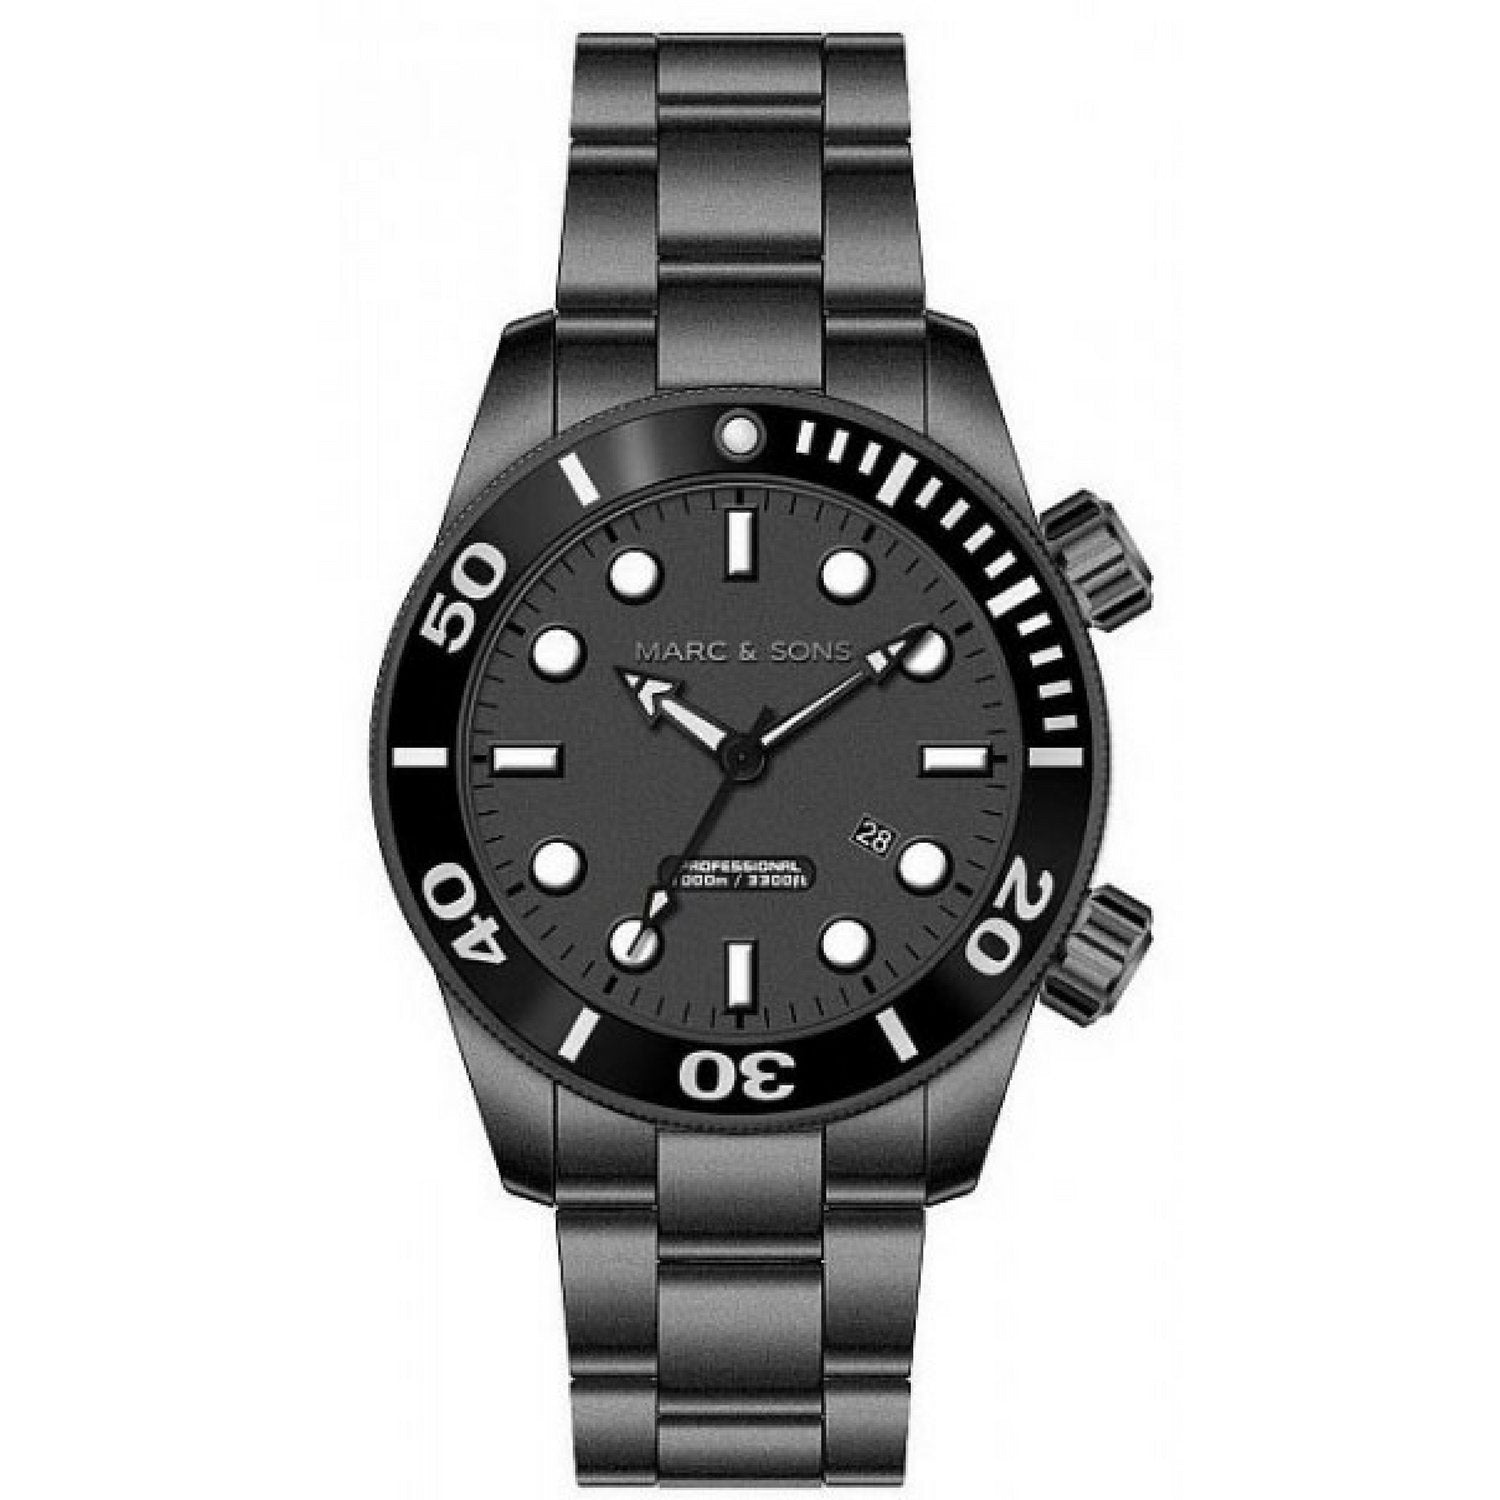 MARC & SONS 1000M Professional automatic Diver watch MSD-022